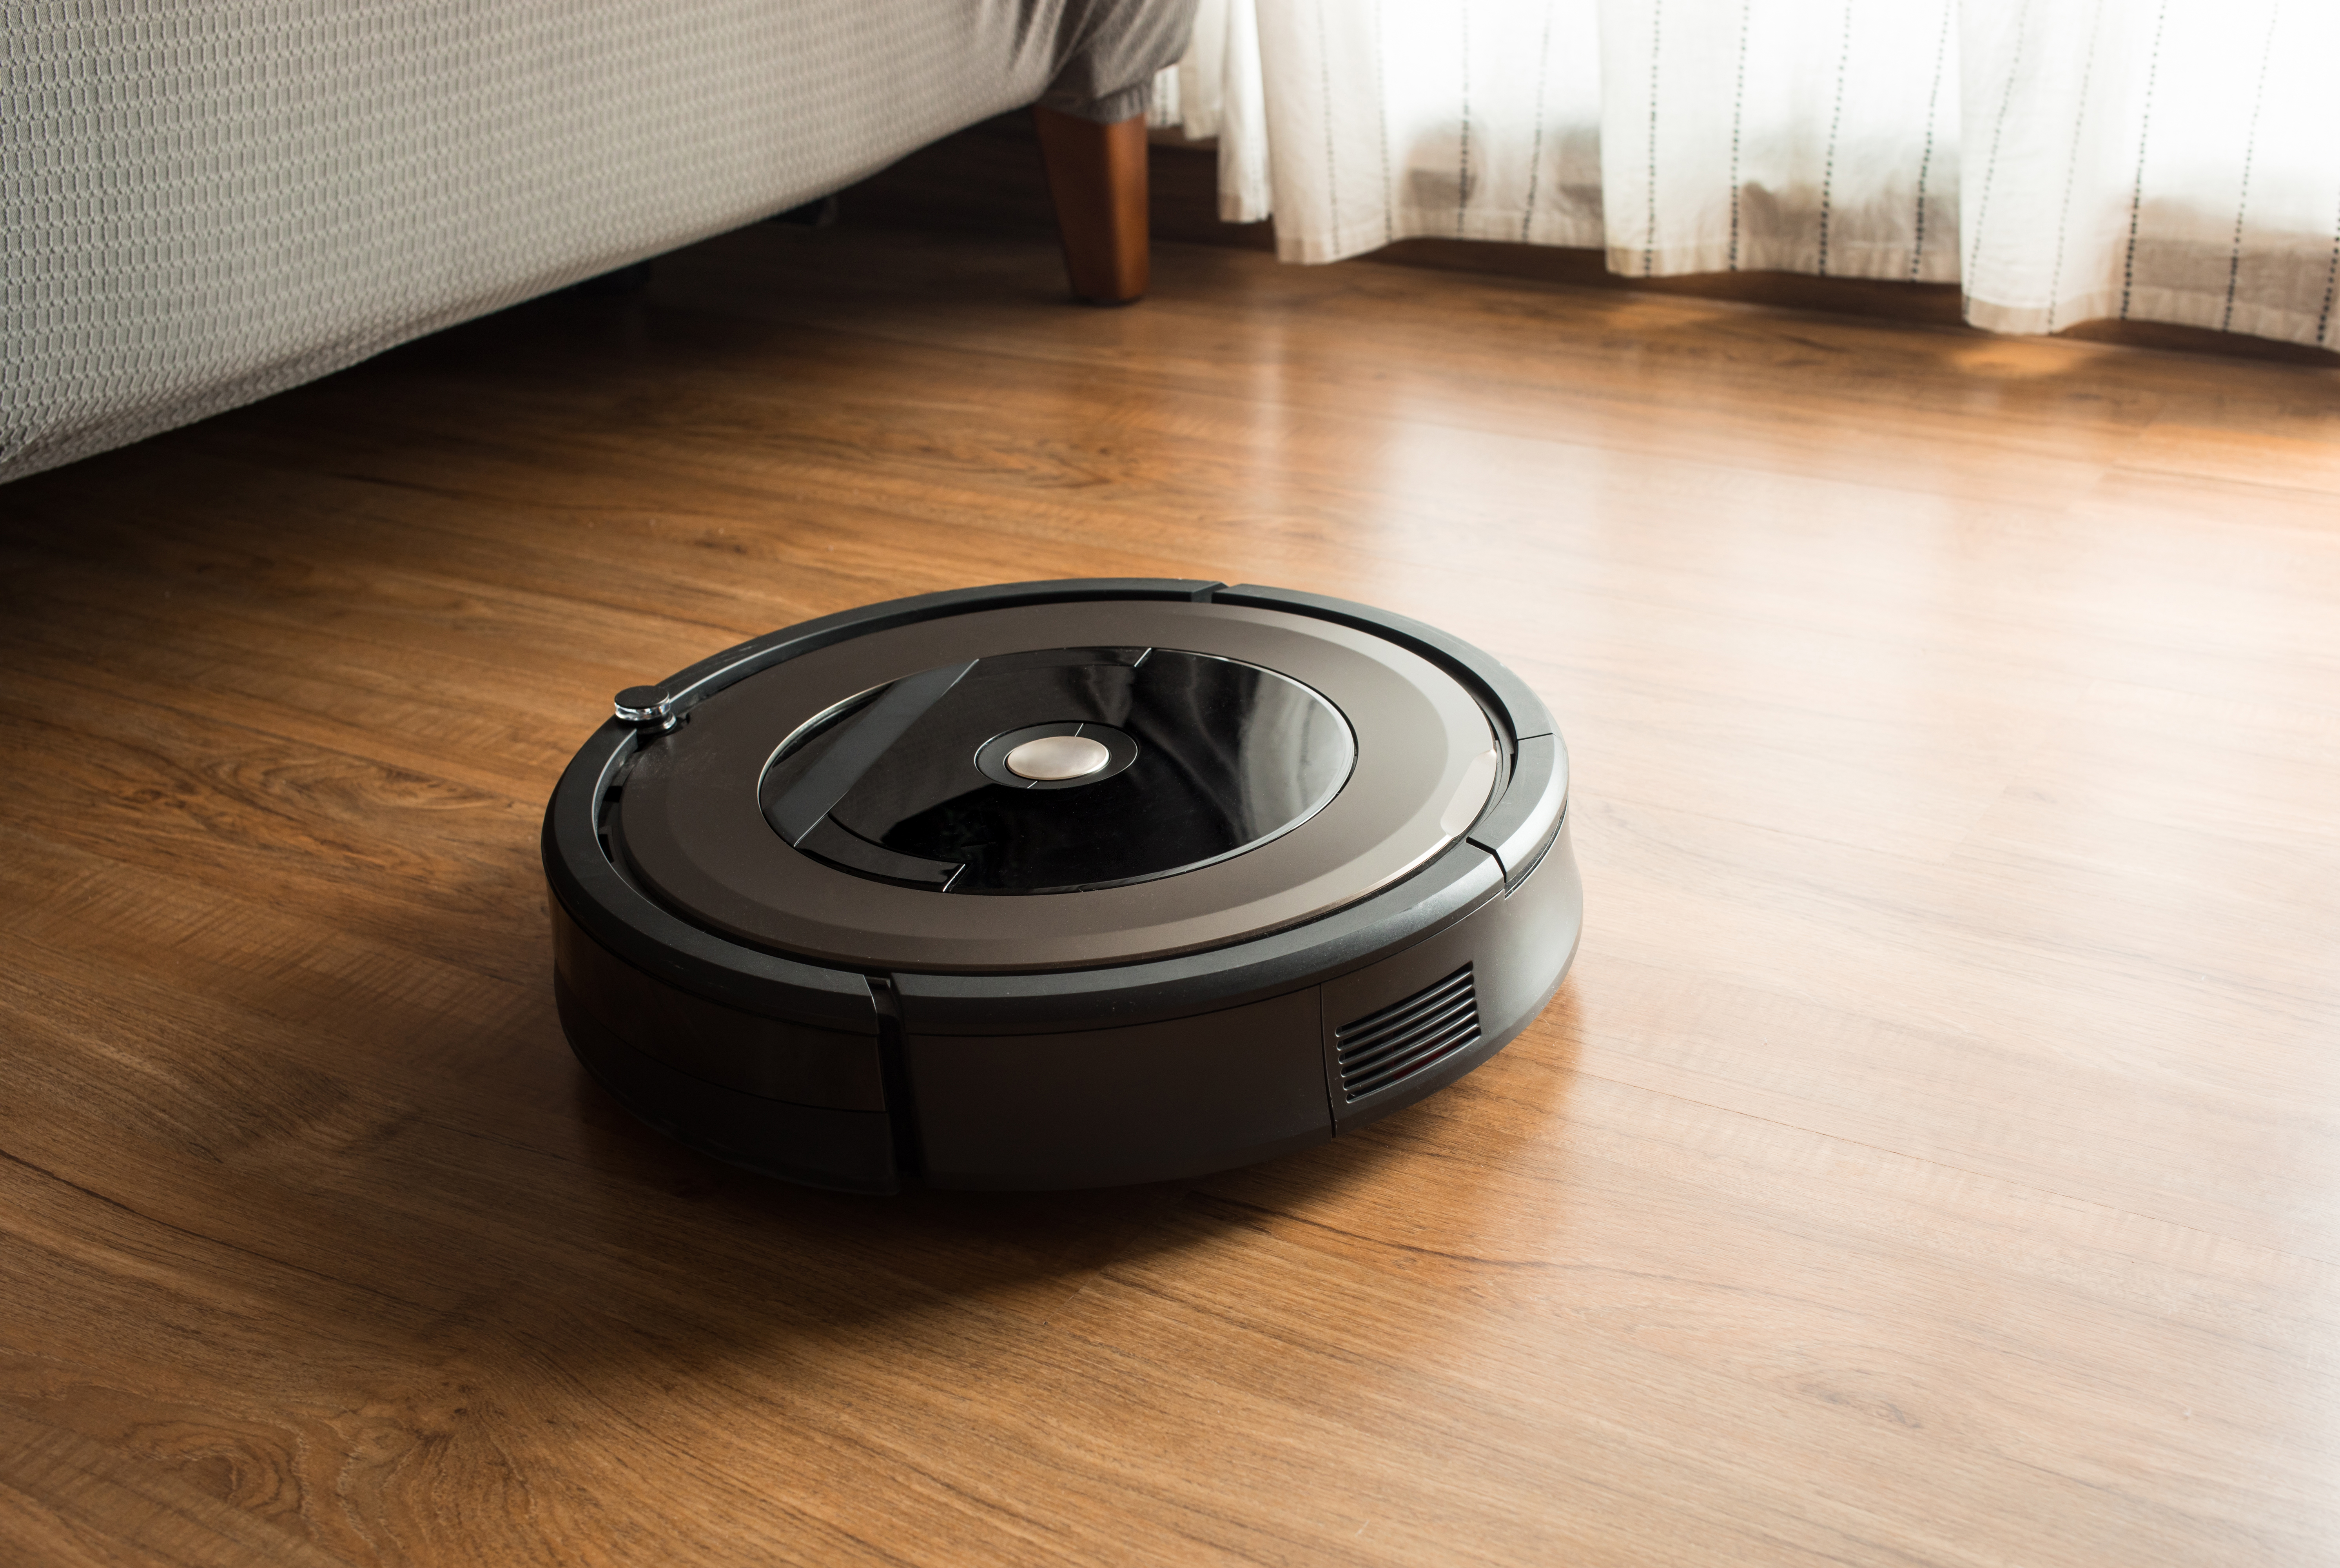 London Måler Ved navn How to Reset the Roomba Battery | eHow